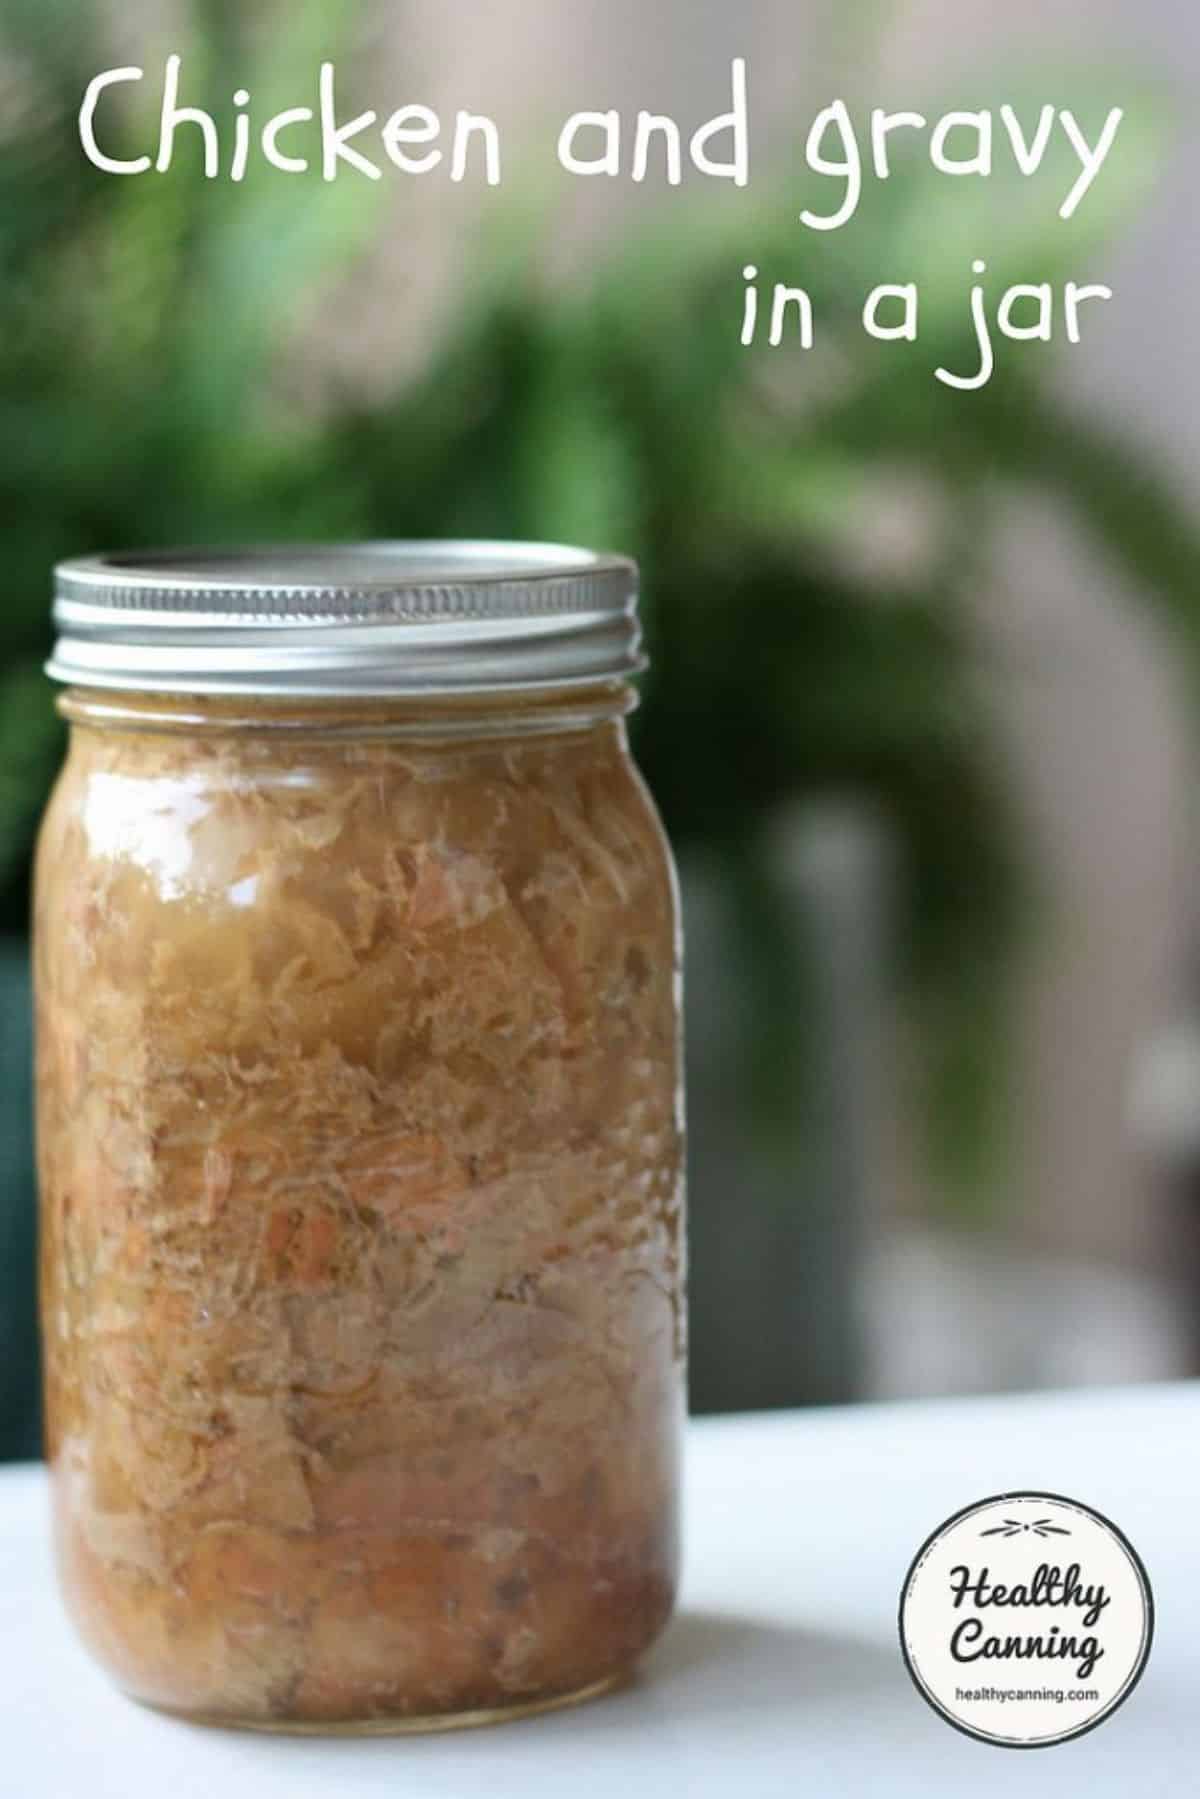 Chicken and gravy dinner canned in a glass jar.